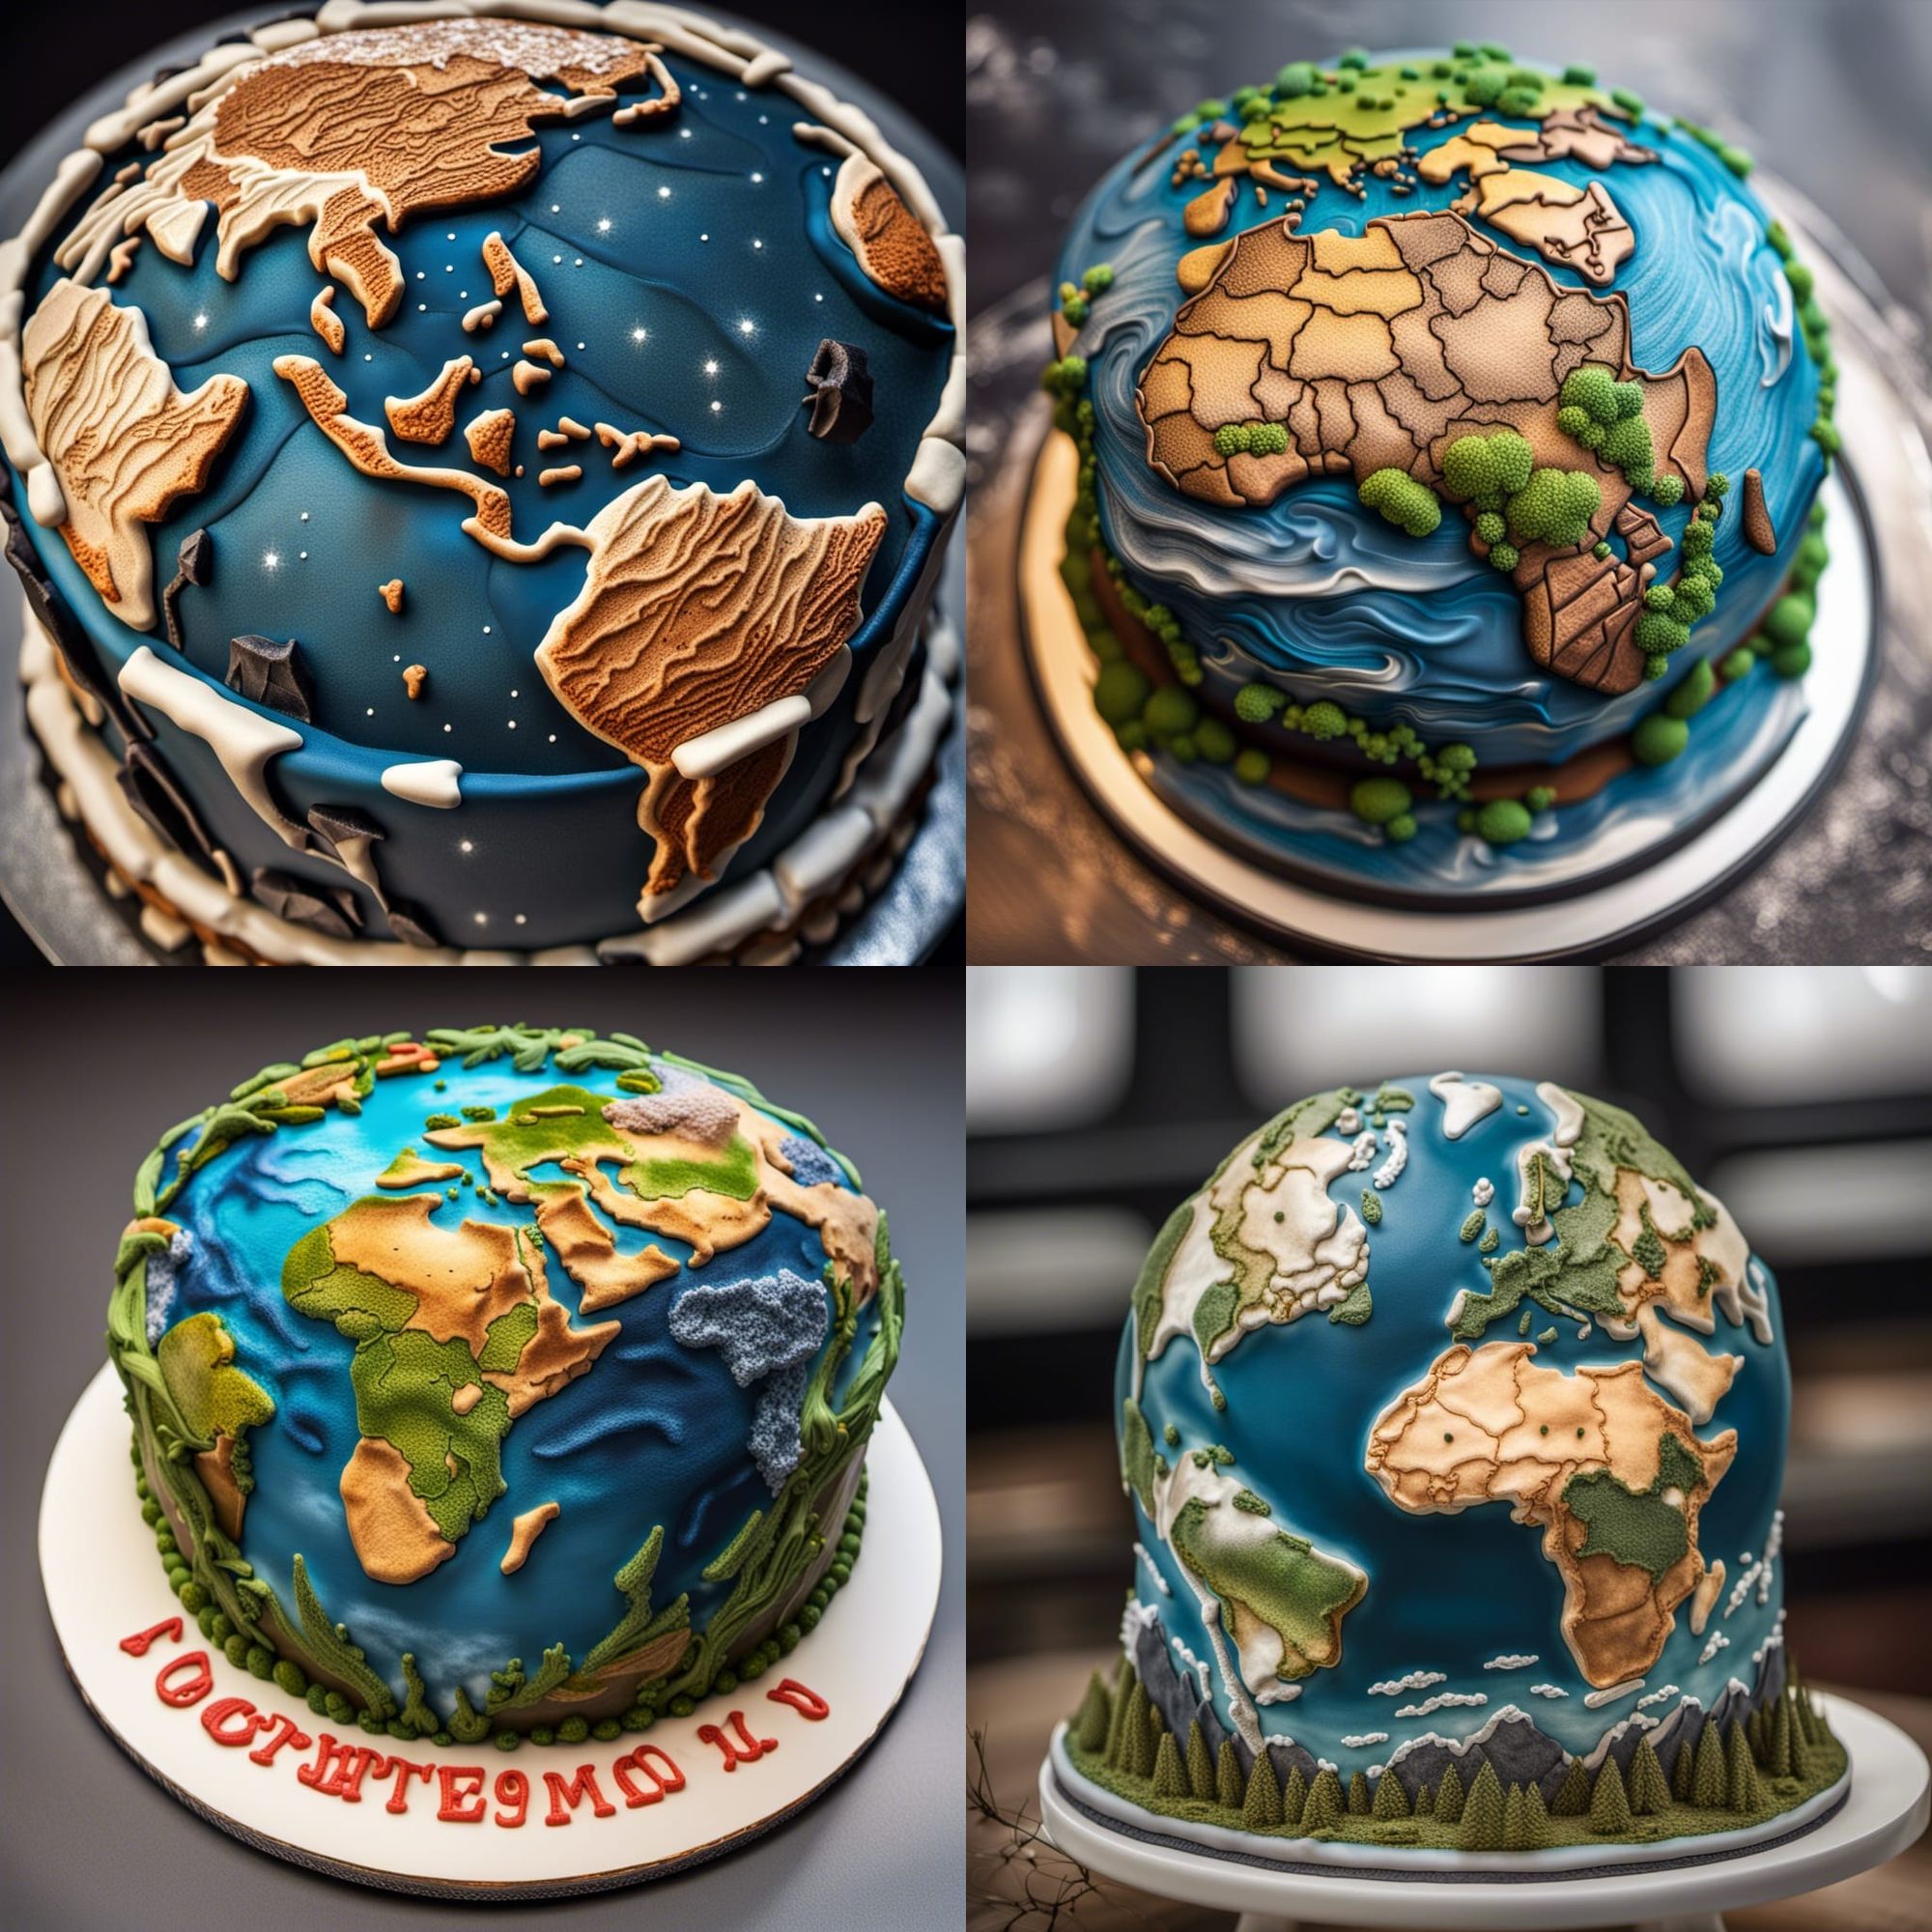 Best Earth Day Birthday Cakes | Edible East Bay